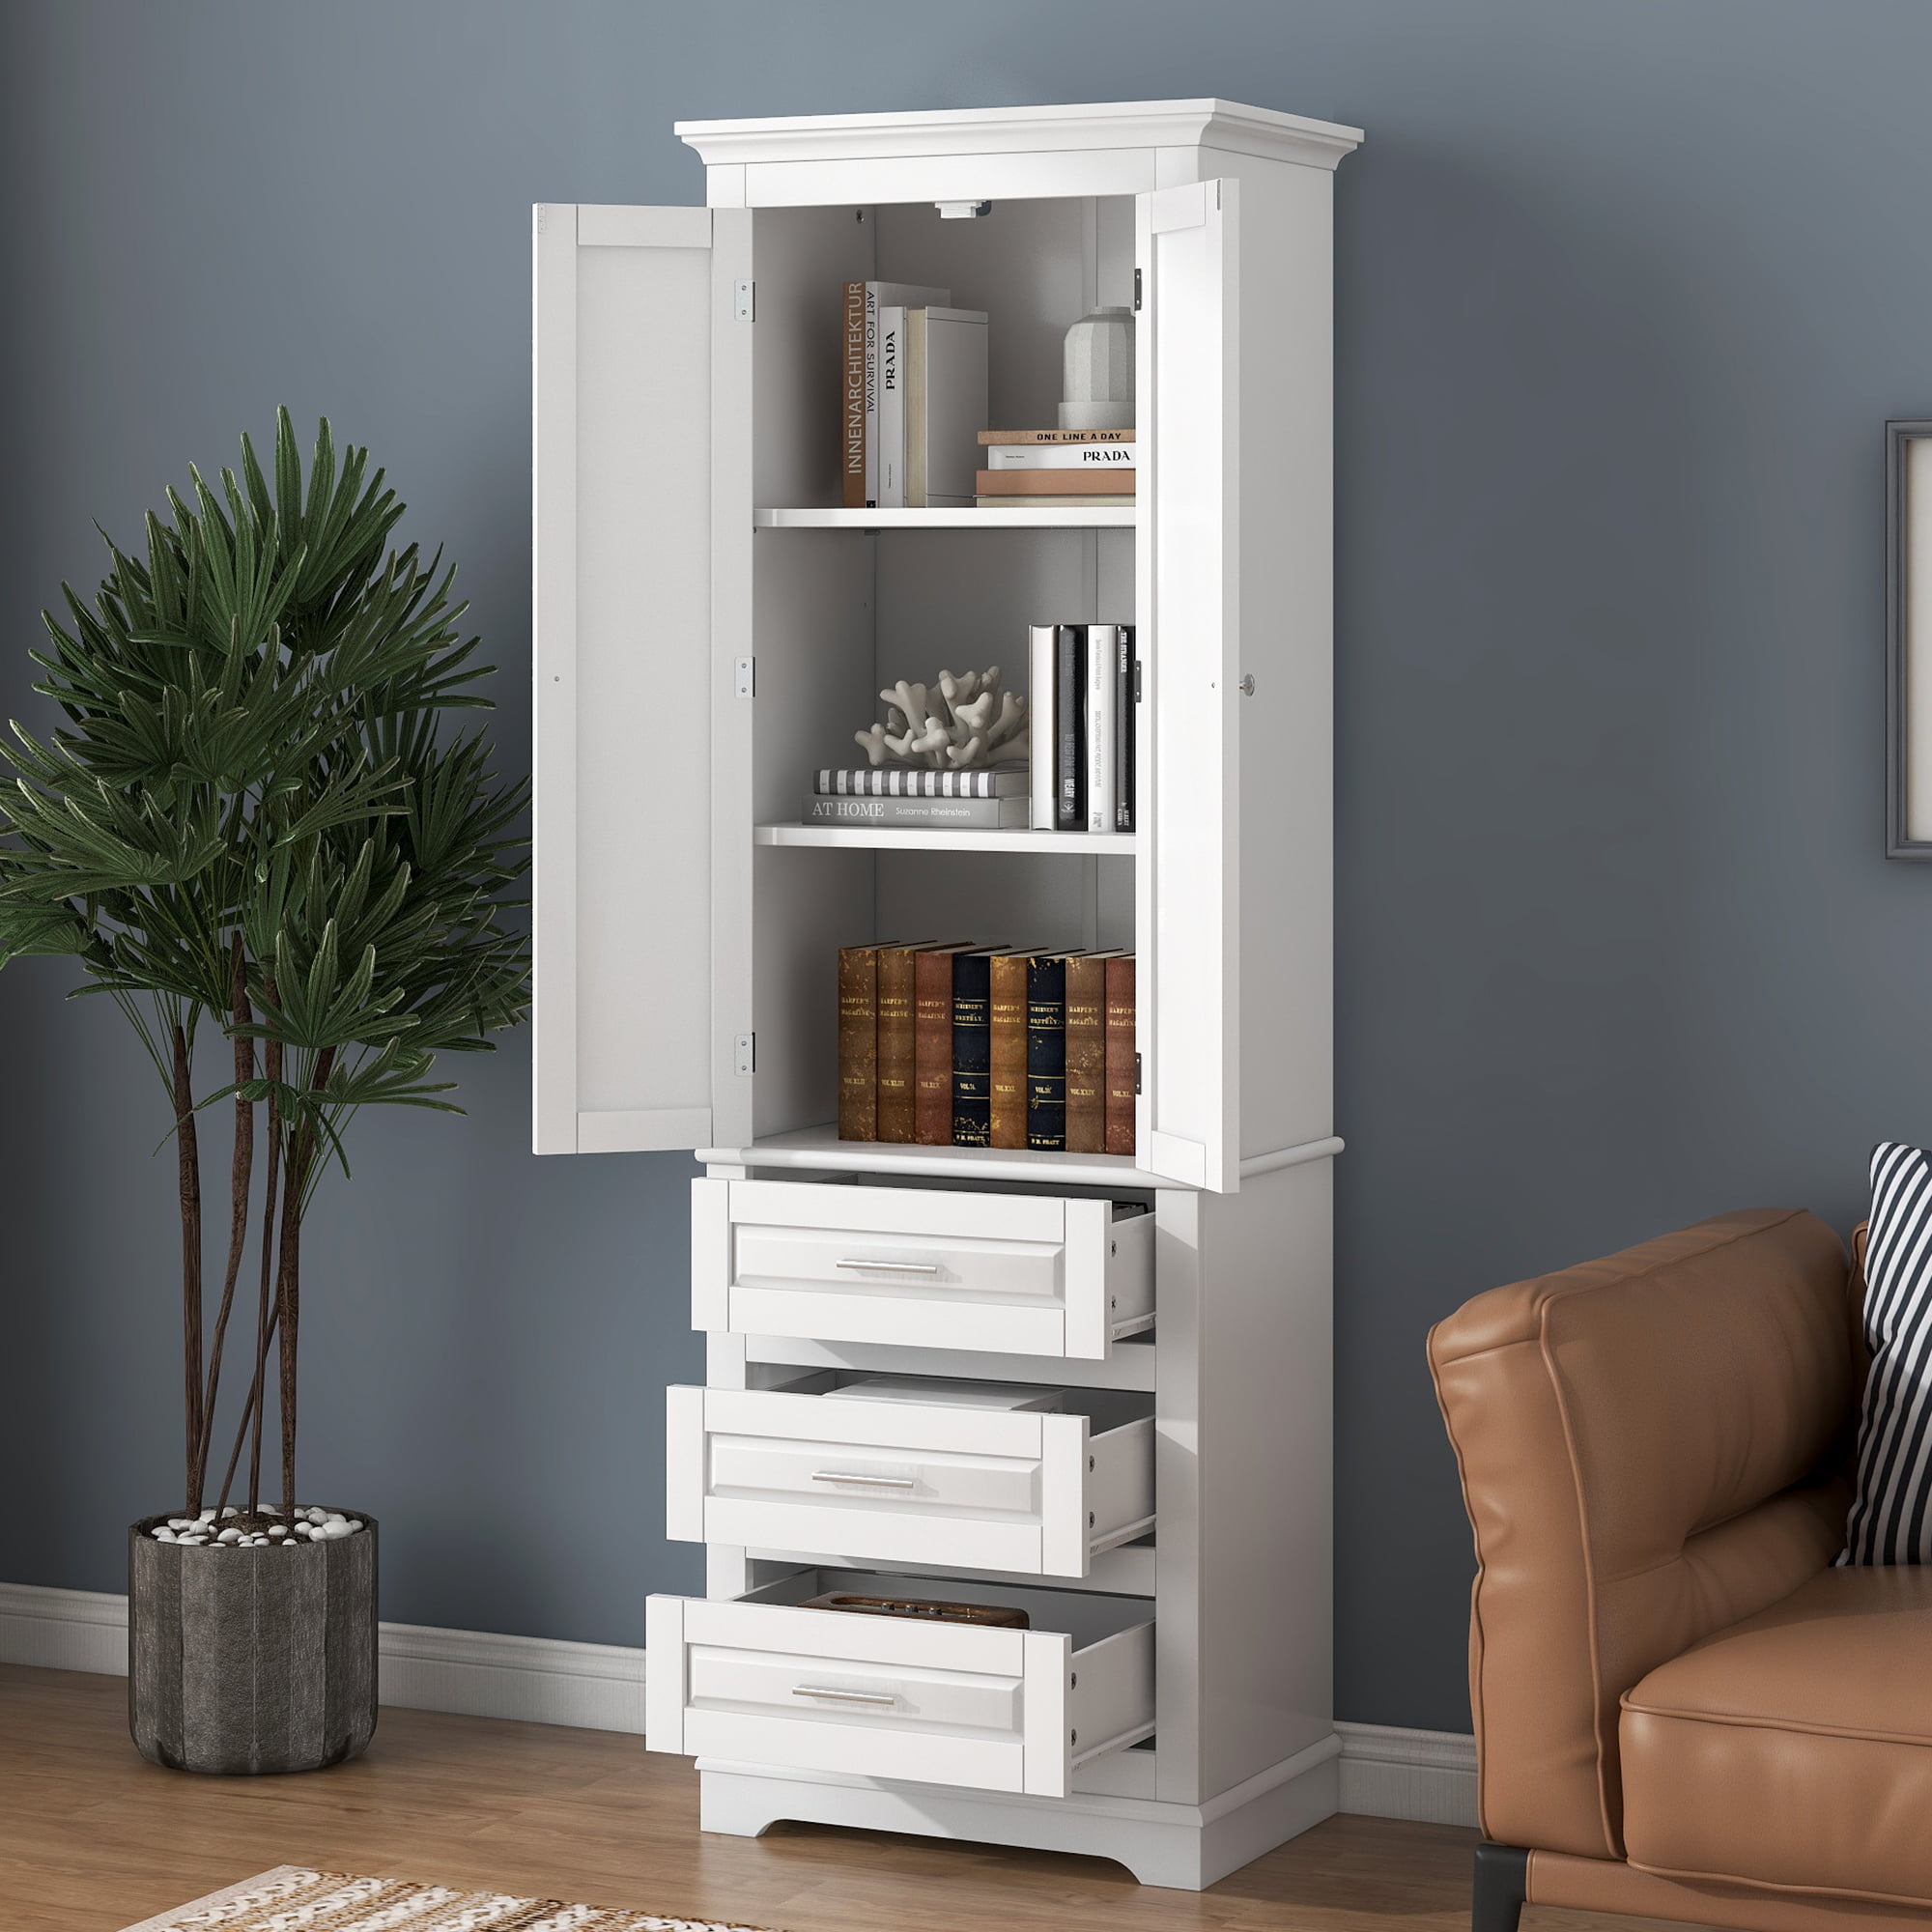 Tall Storage Cabinet With Three Drawers - WF299282AAK